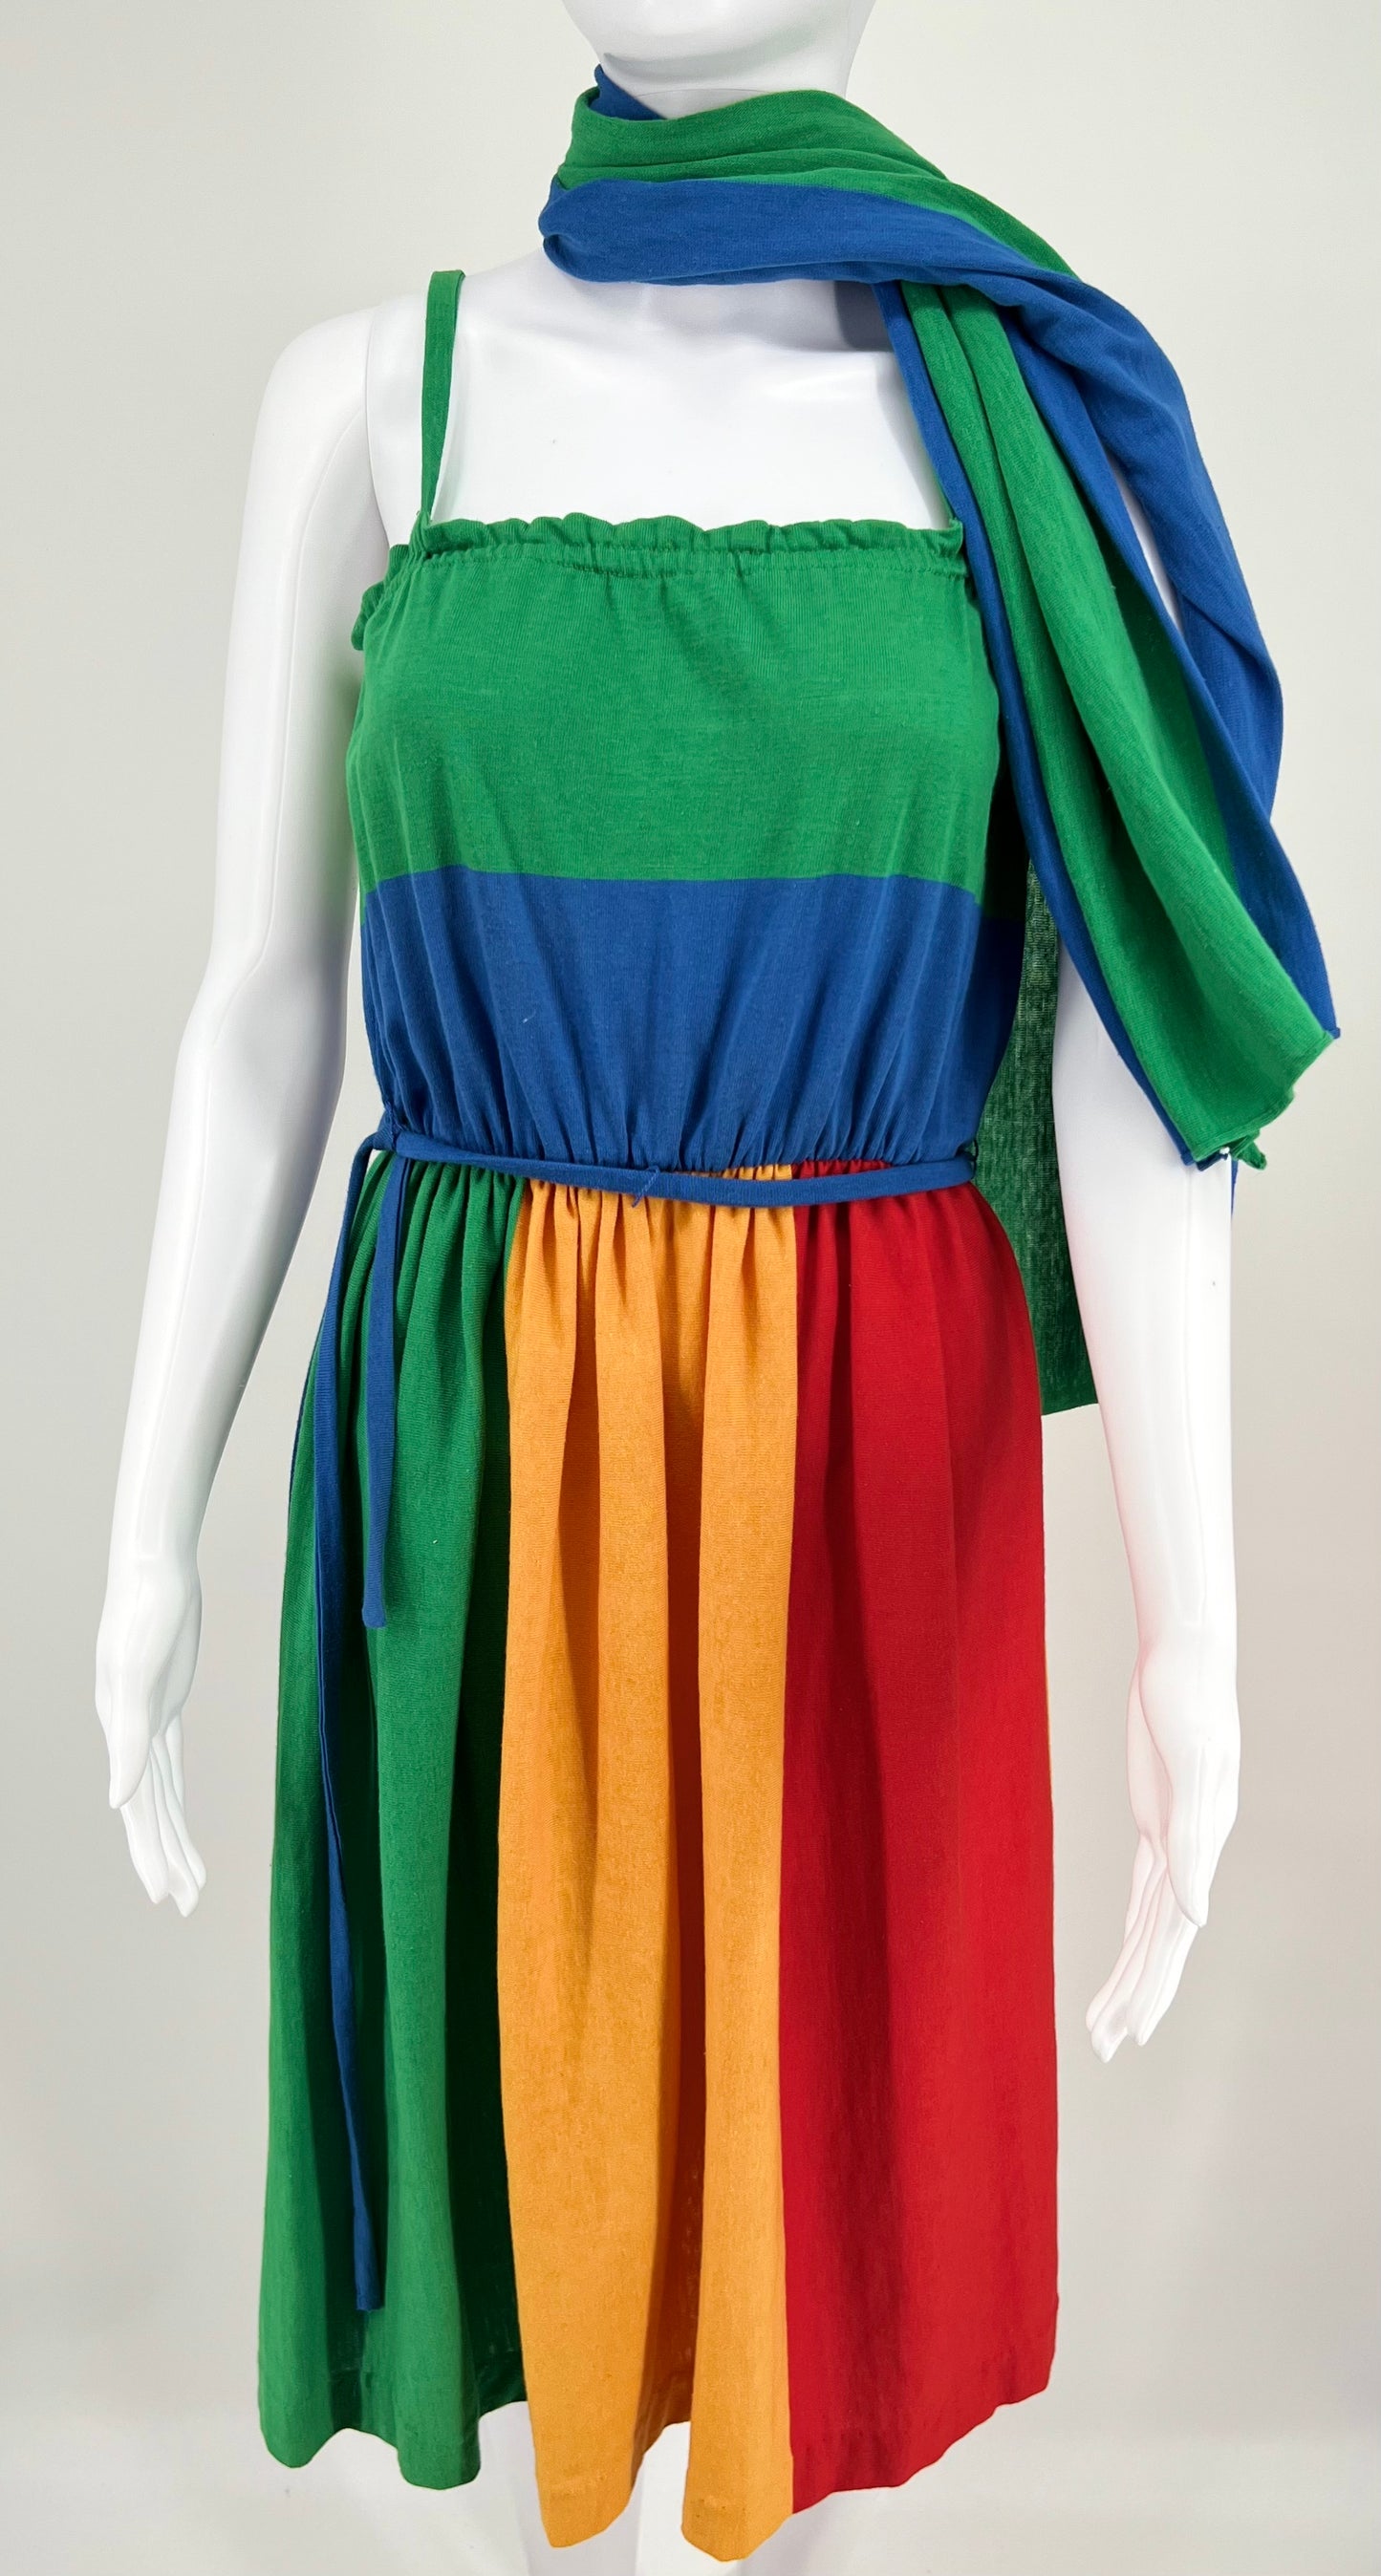 Vintage 80s Caron Chicago Abstract Colorblock Spaghetti-Strap Dress with Matching Scarf (Blue / Green / Yellow / Red) WOMENS S/M